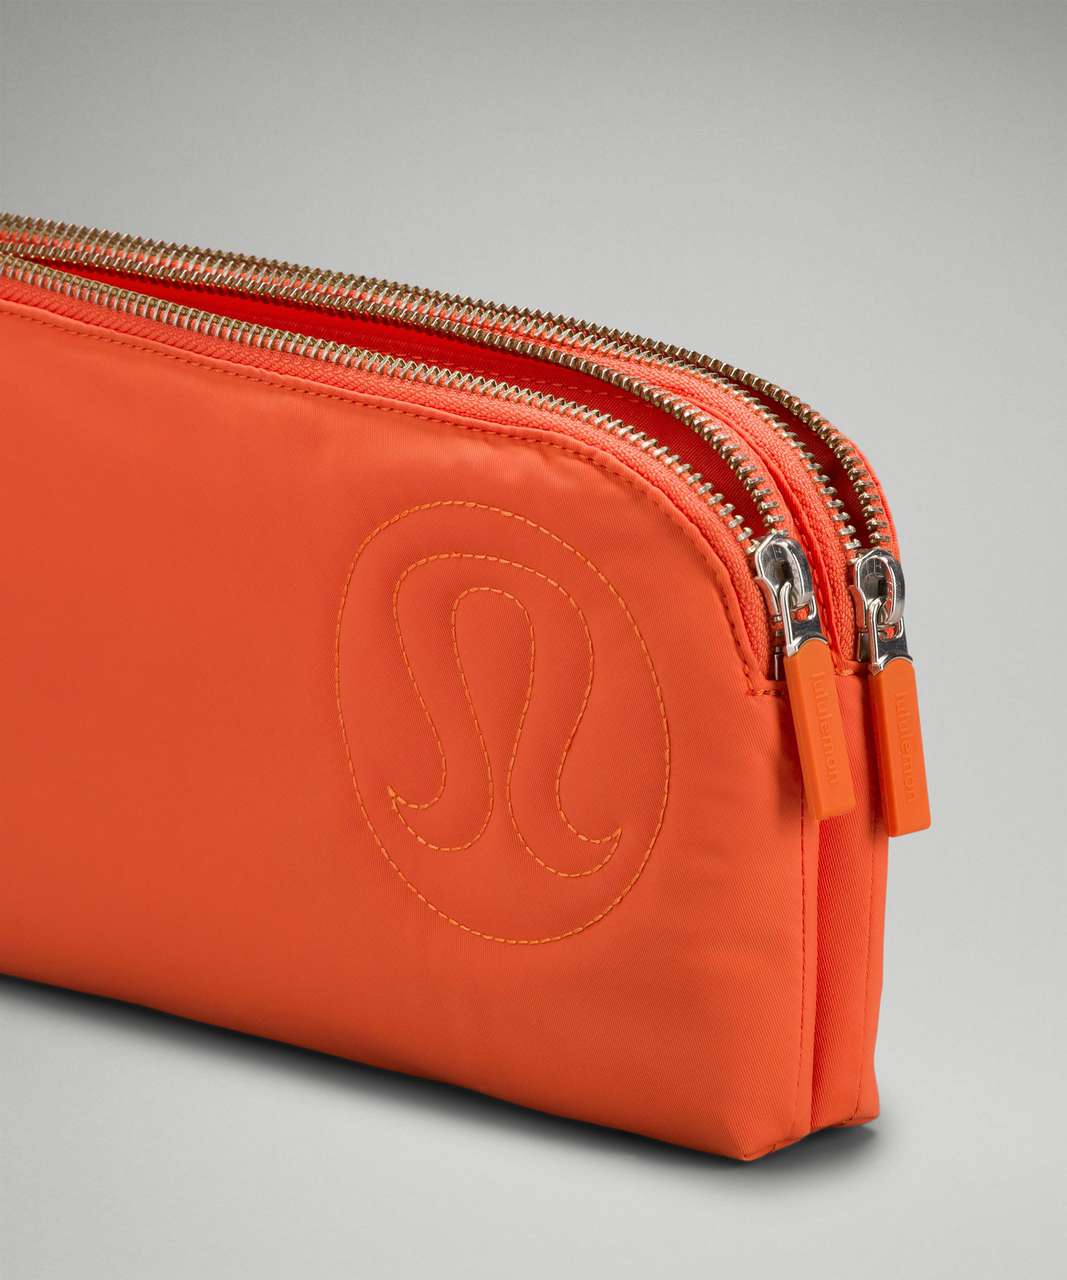 Lululemon Now and Always Pouch *Puffy - Warm Coral